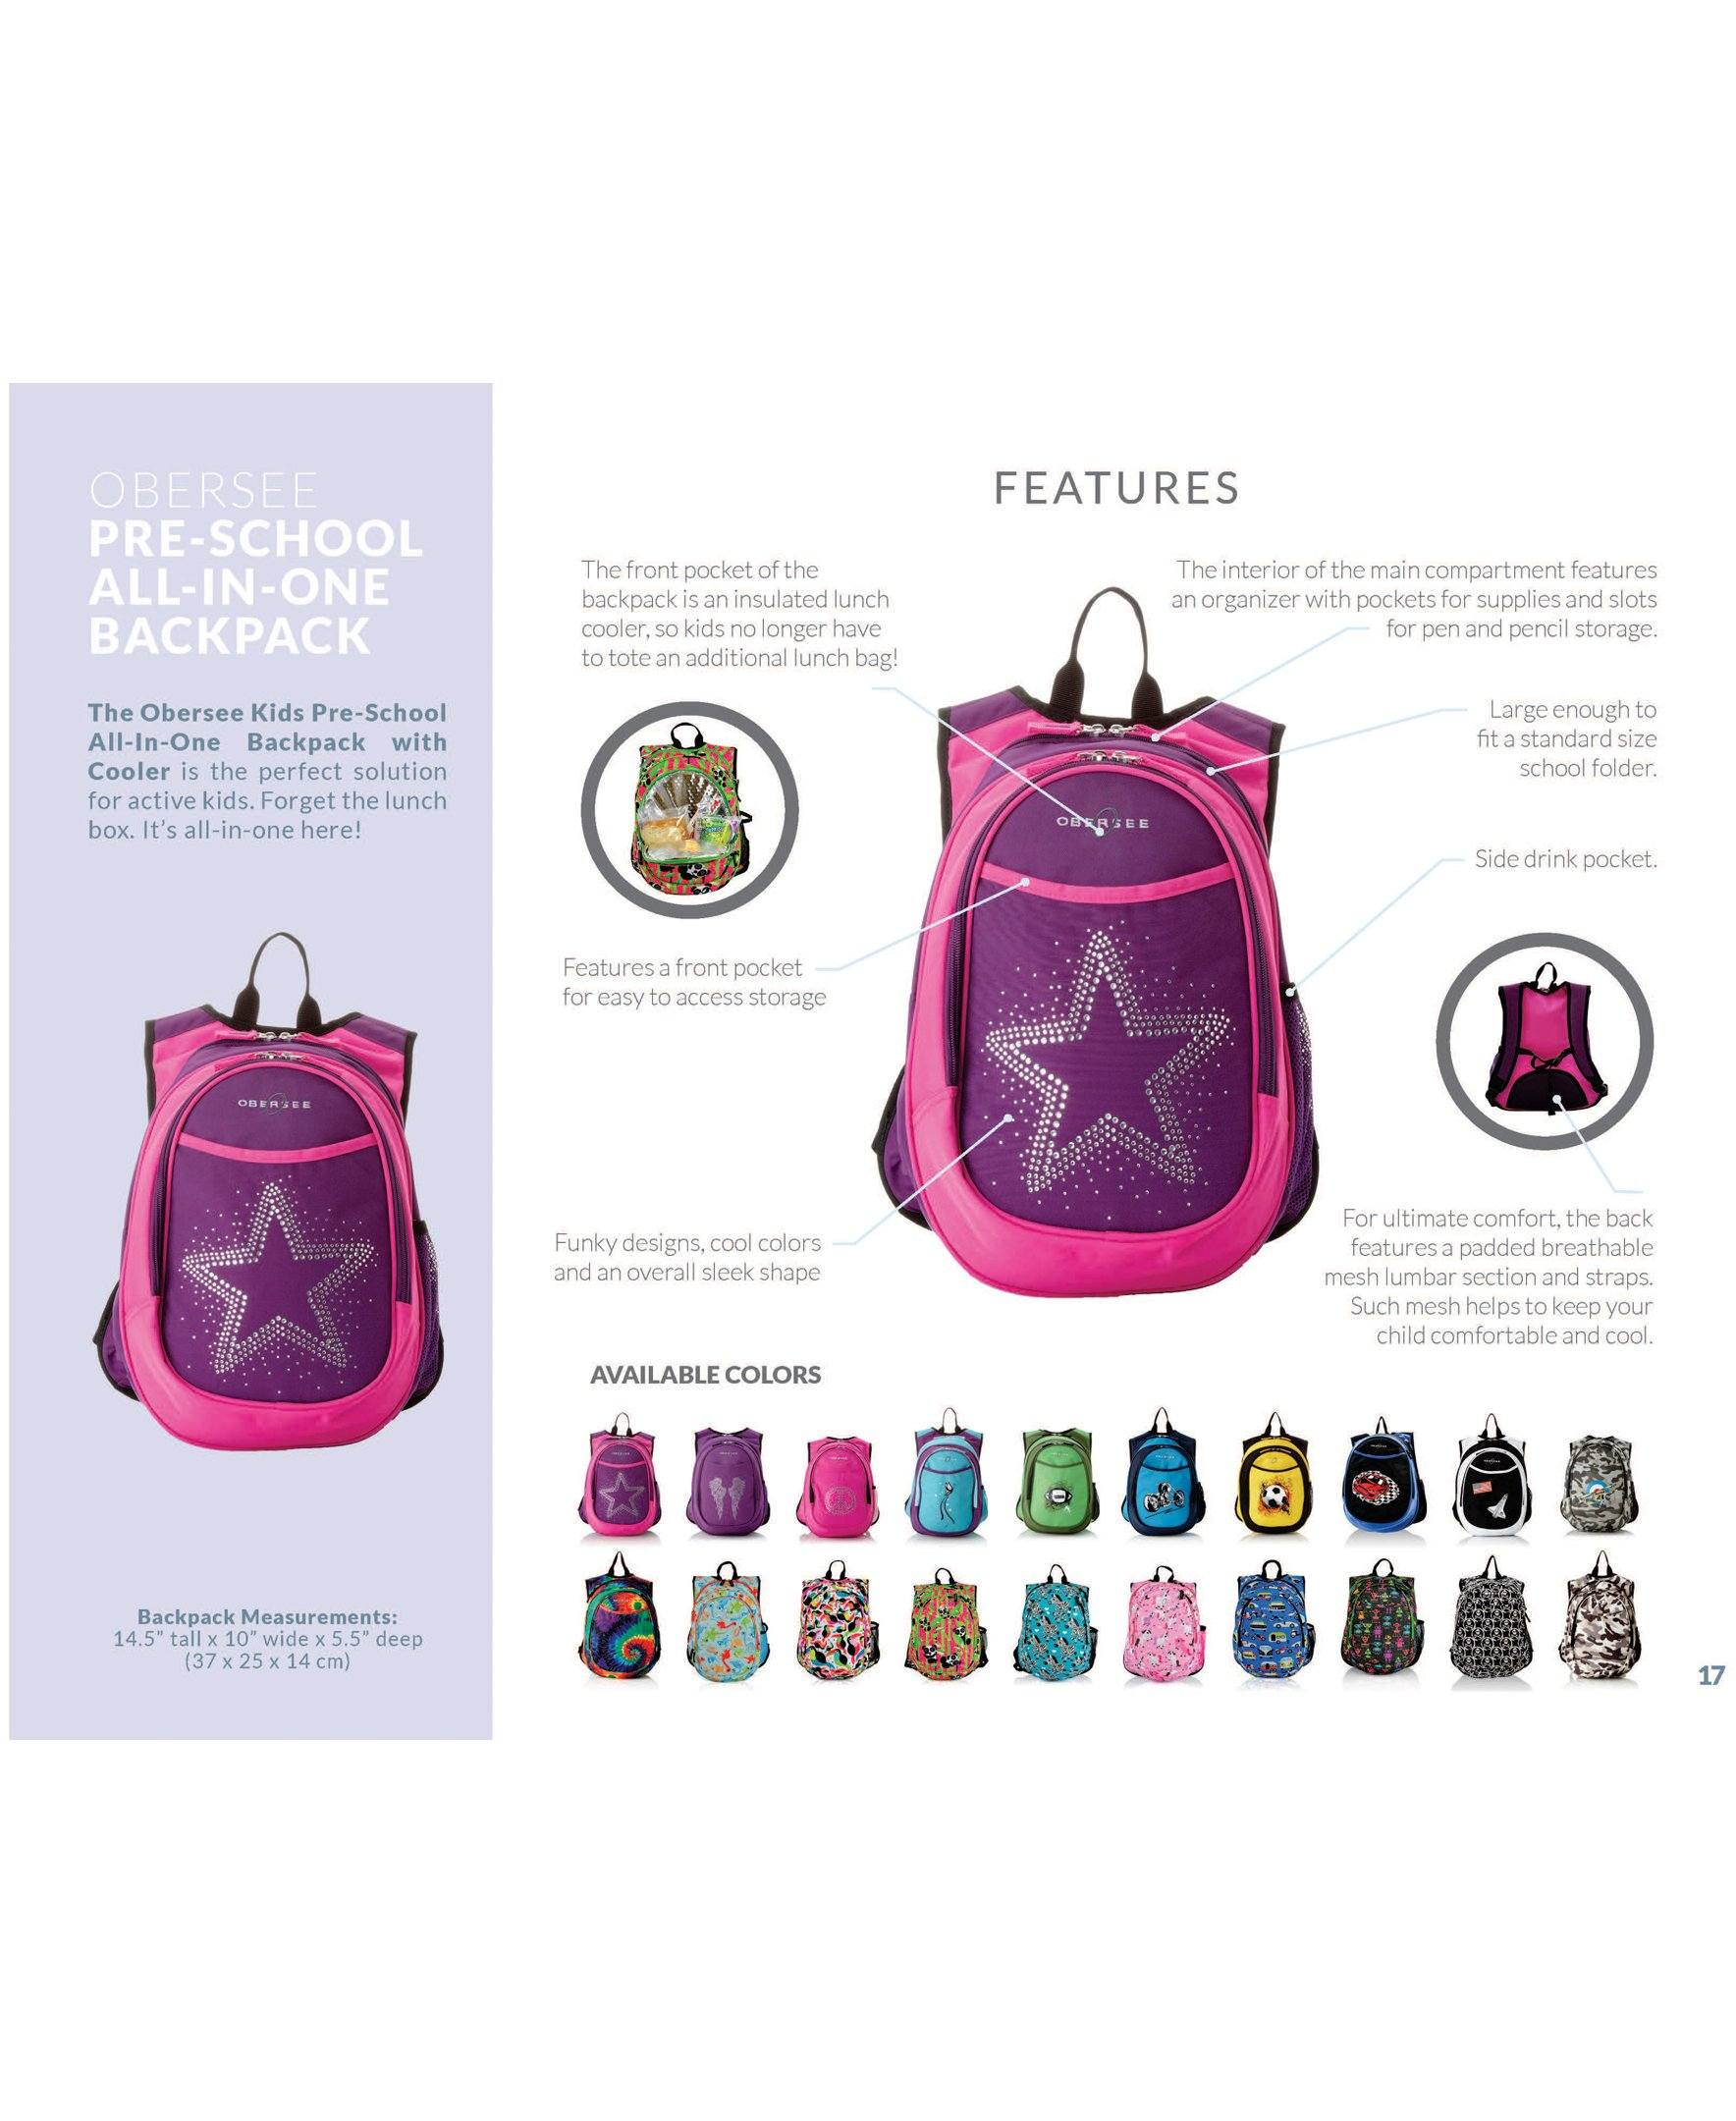 O3KCBP011 Obersee Mini Preschool All-in-One Backpack for Toddlers and Kids with integrated Insulated Cooler | Tie Dye - image 3 of 3